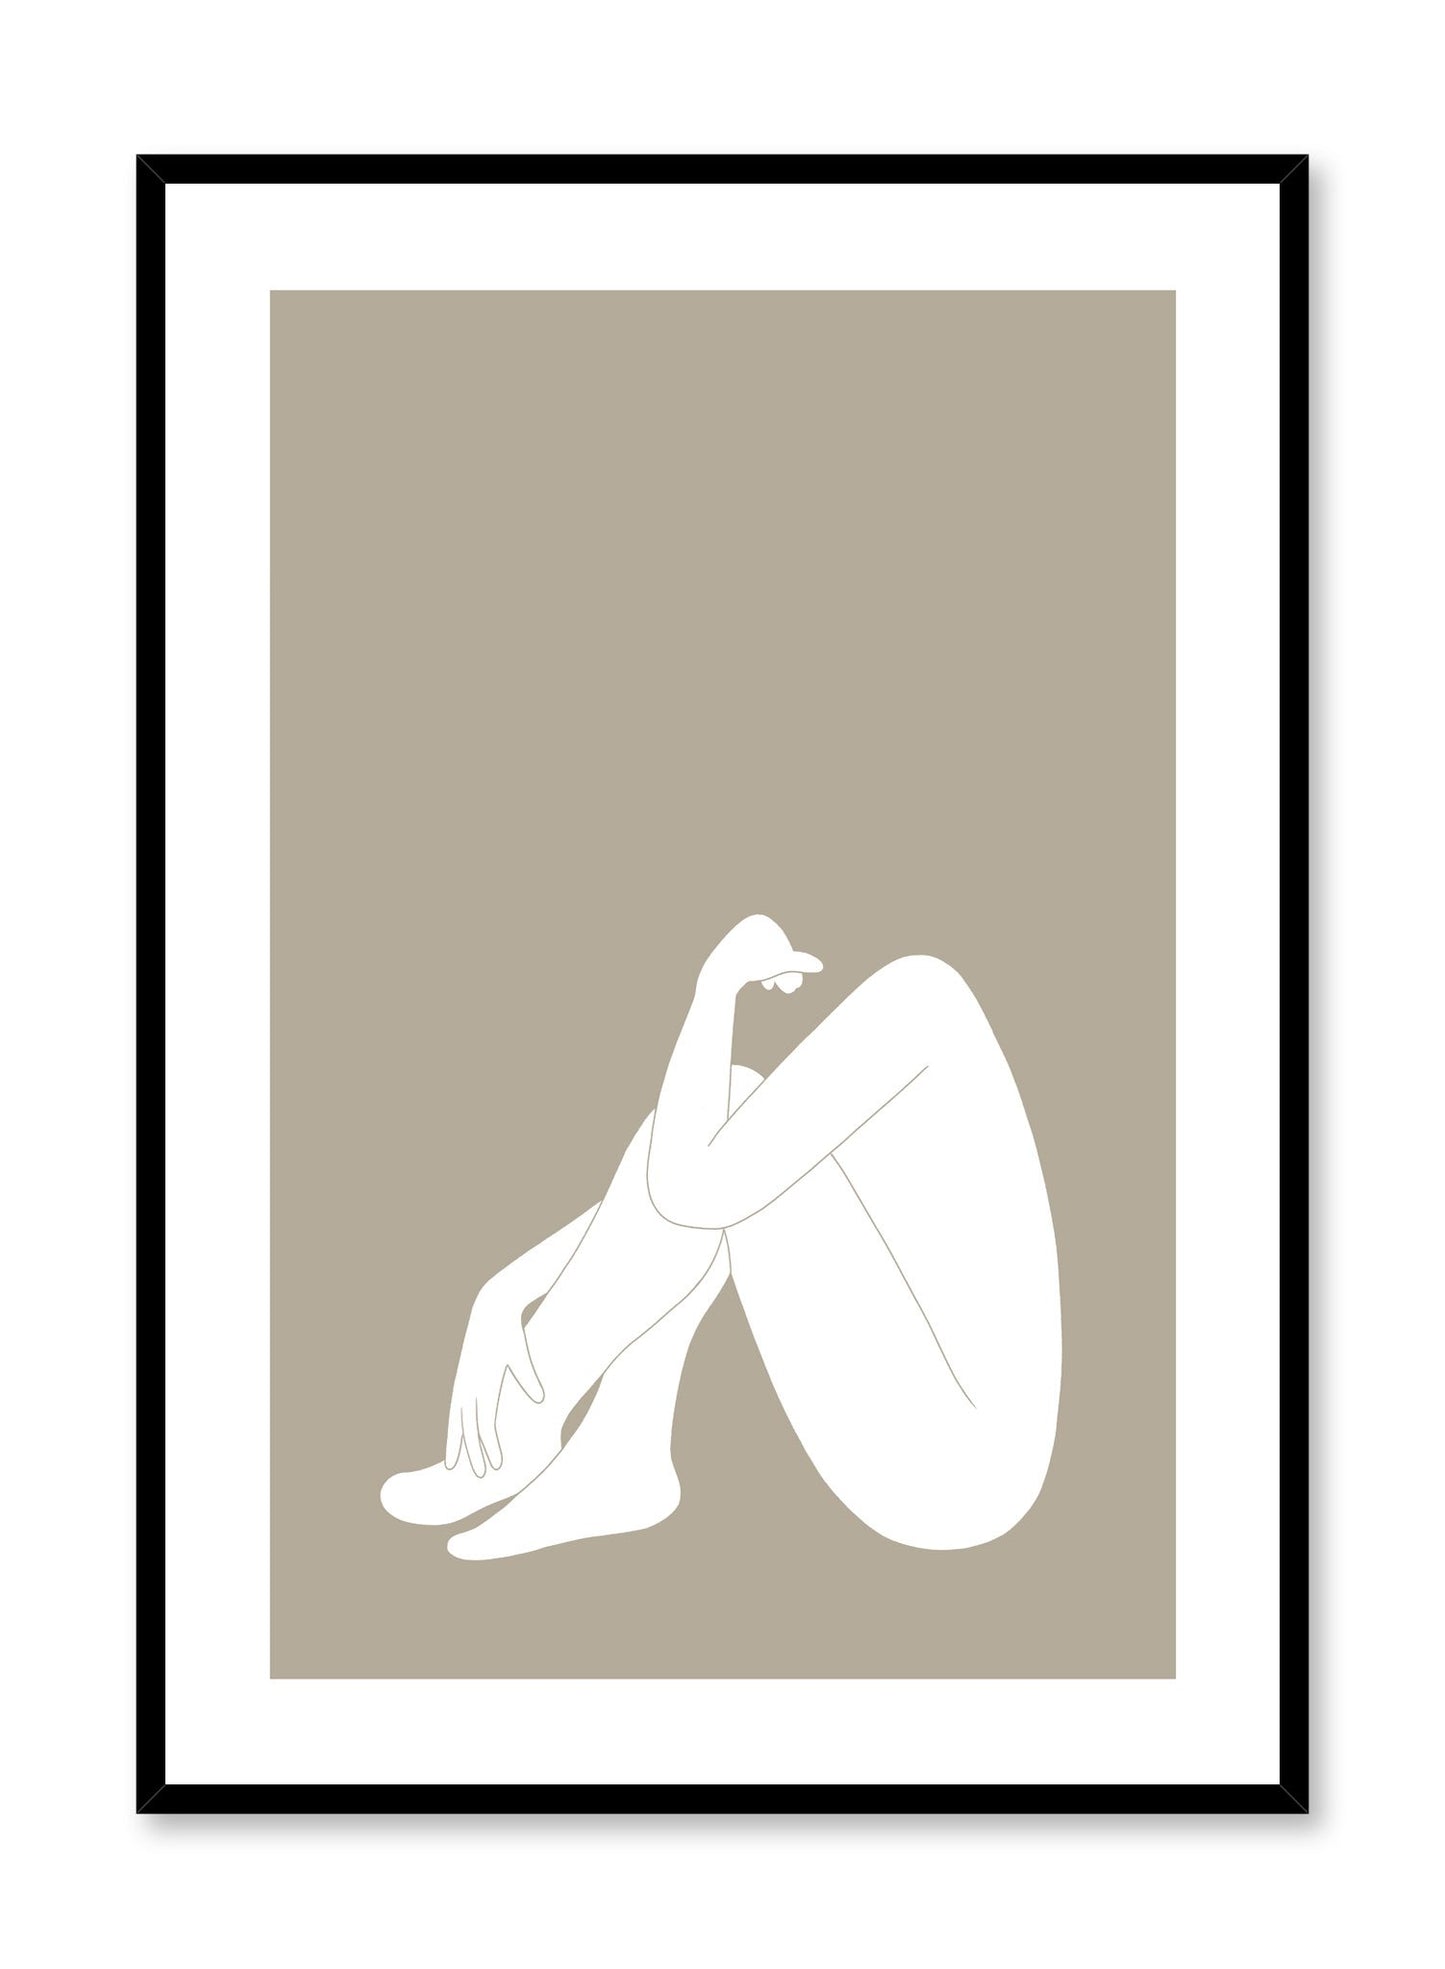 Minimalist design poster by Opposite Wall with abstract woman sitting in contemplation in white